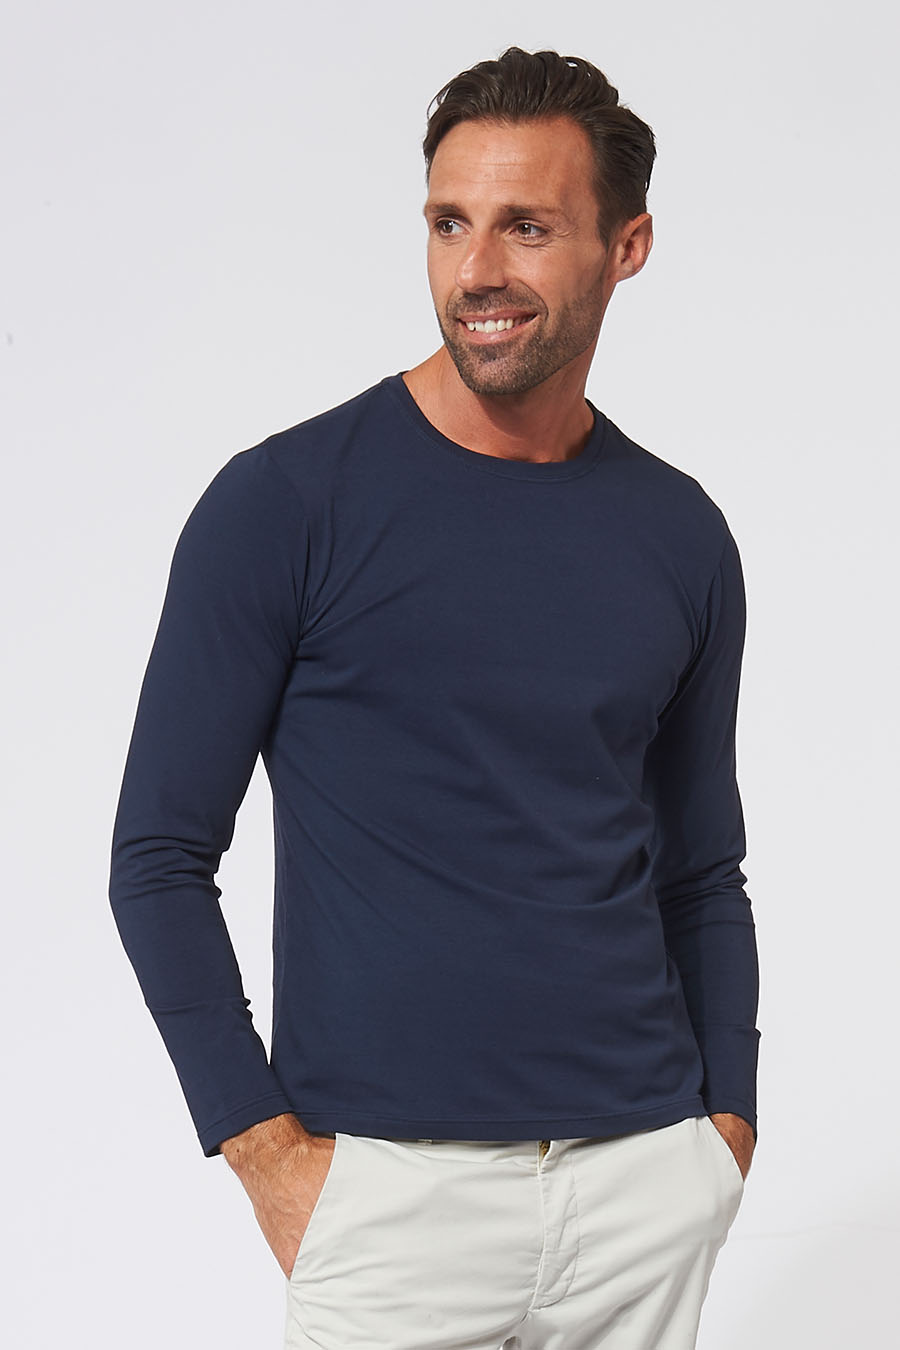 Tee-shirt Homme made in France à manches longues marine - Fil Rouge